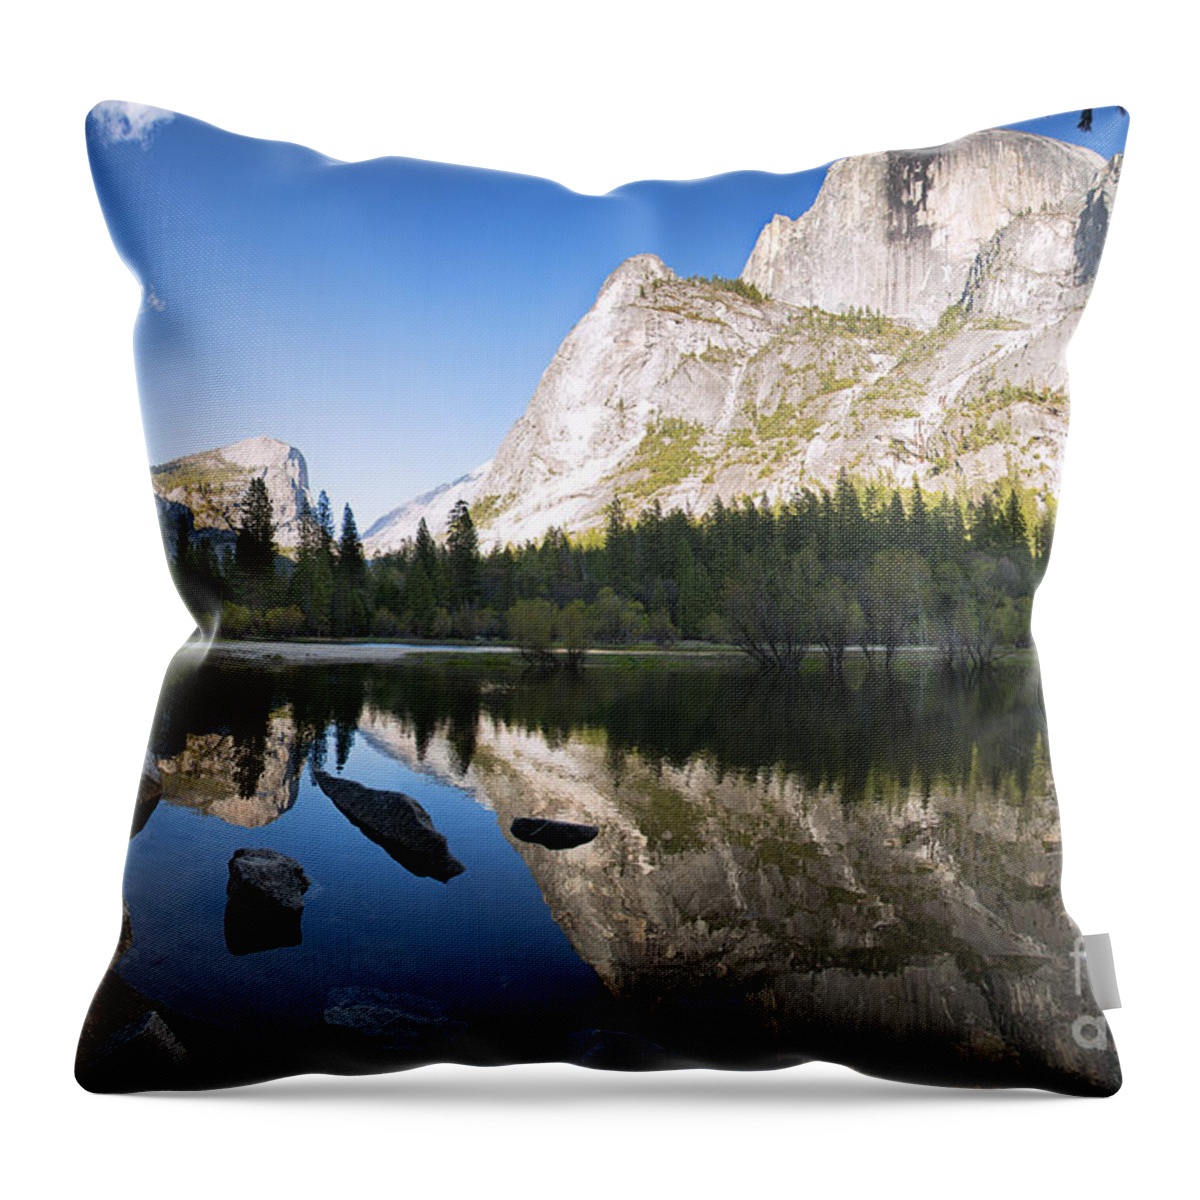 America Throw Pillow featuring the photograph Mirror Lake Yosemite by Jane Rix